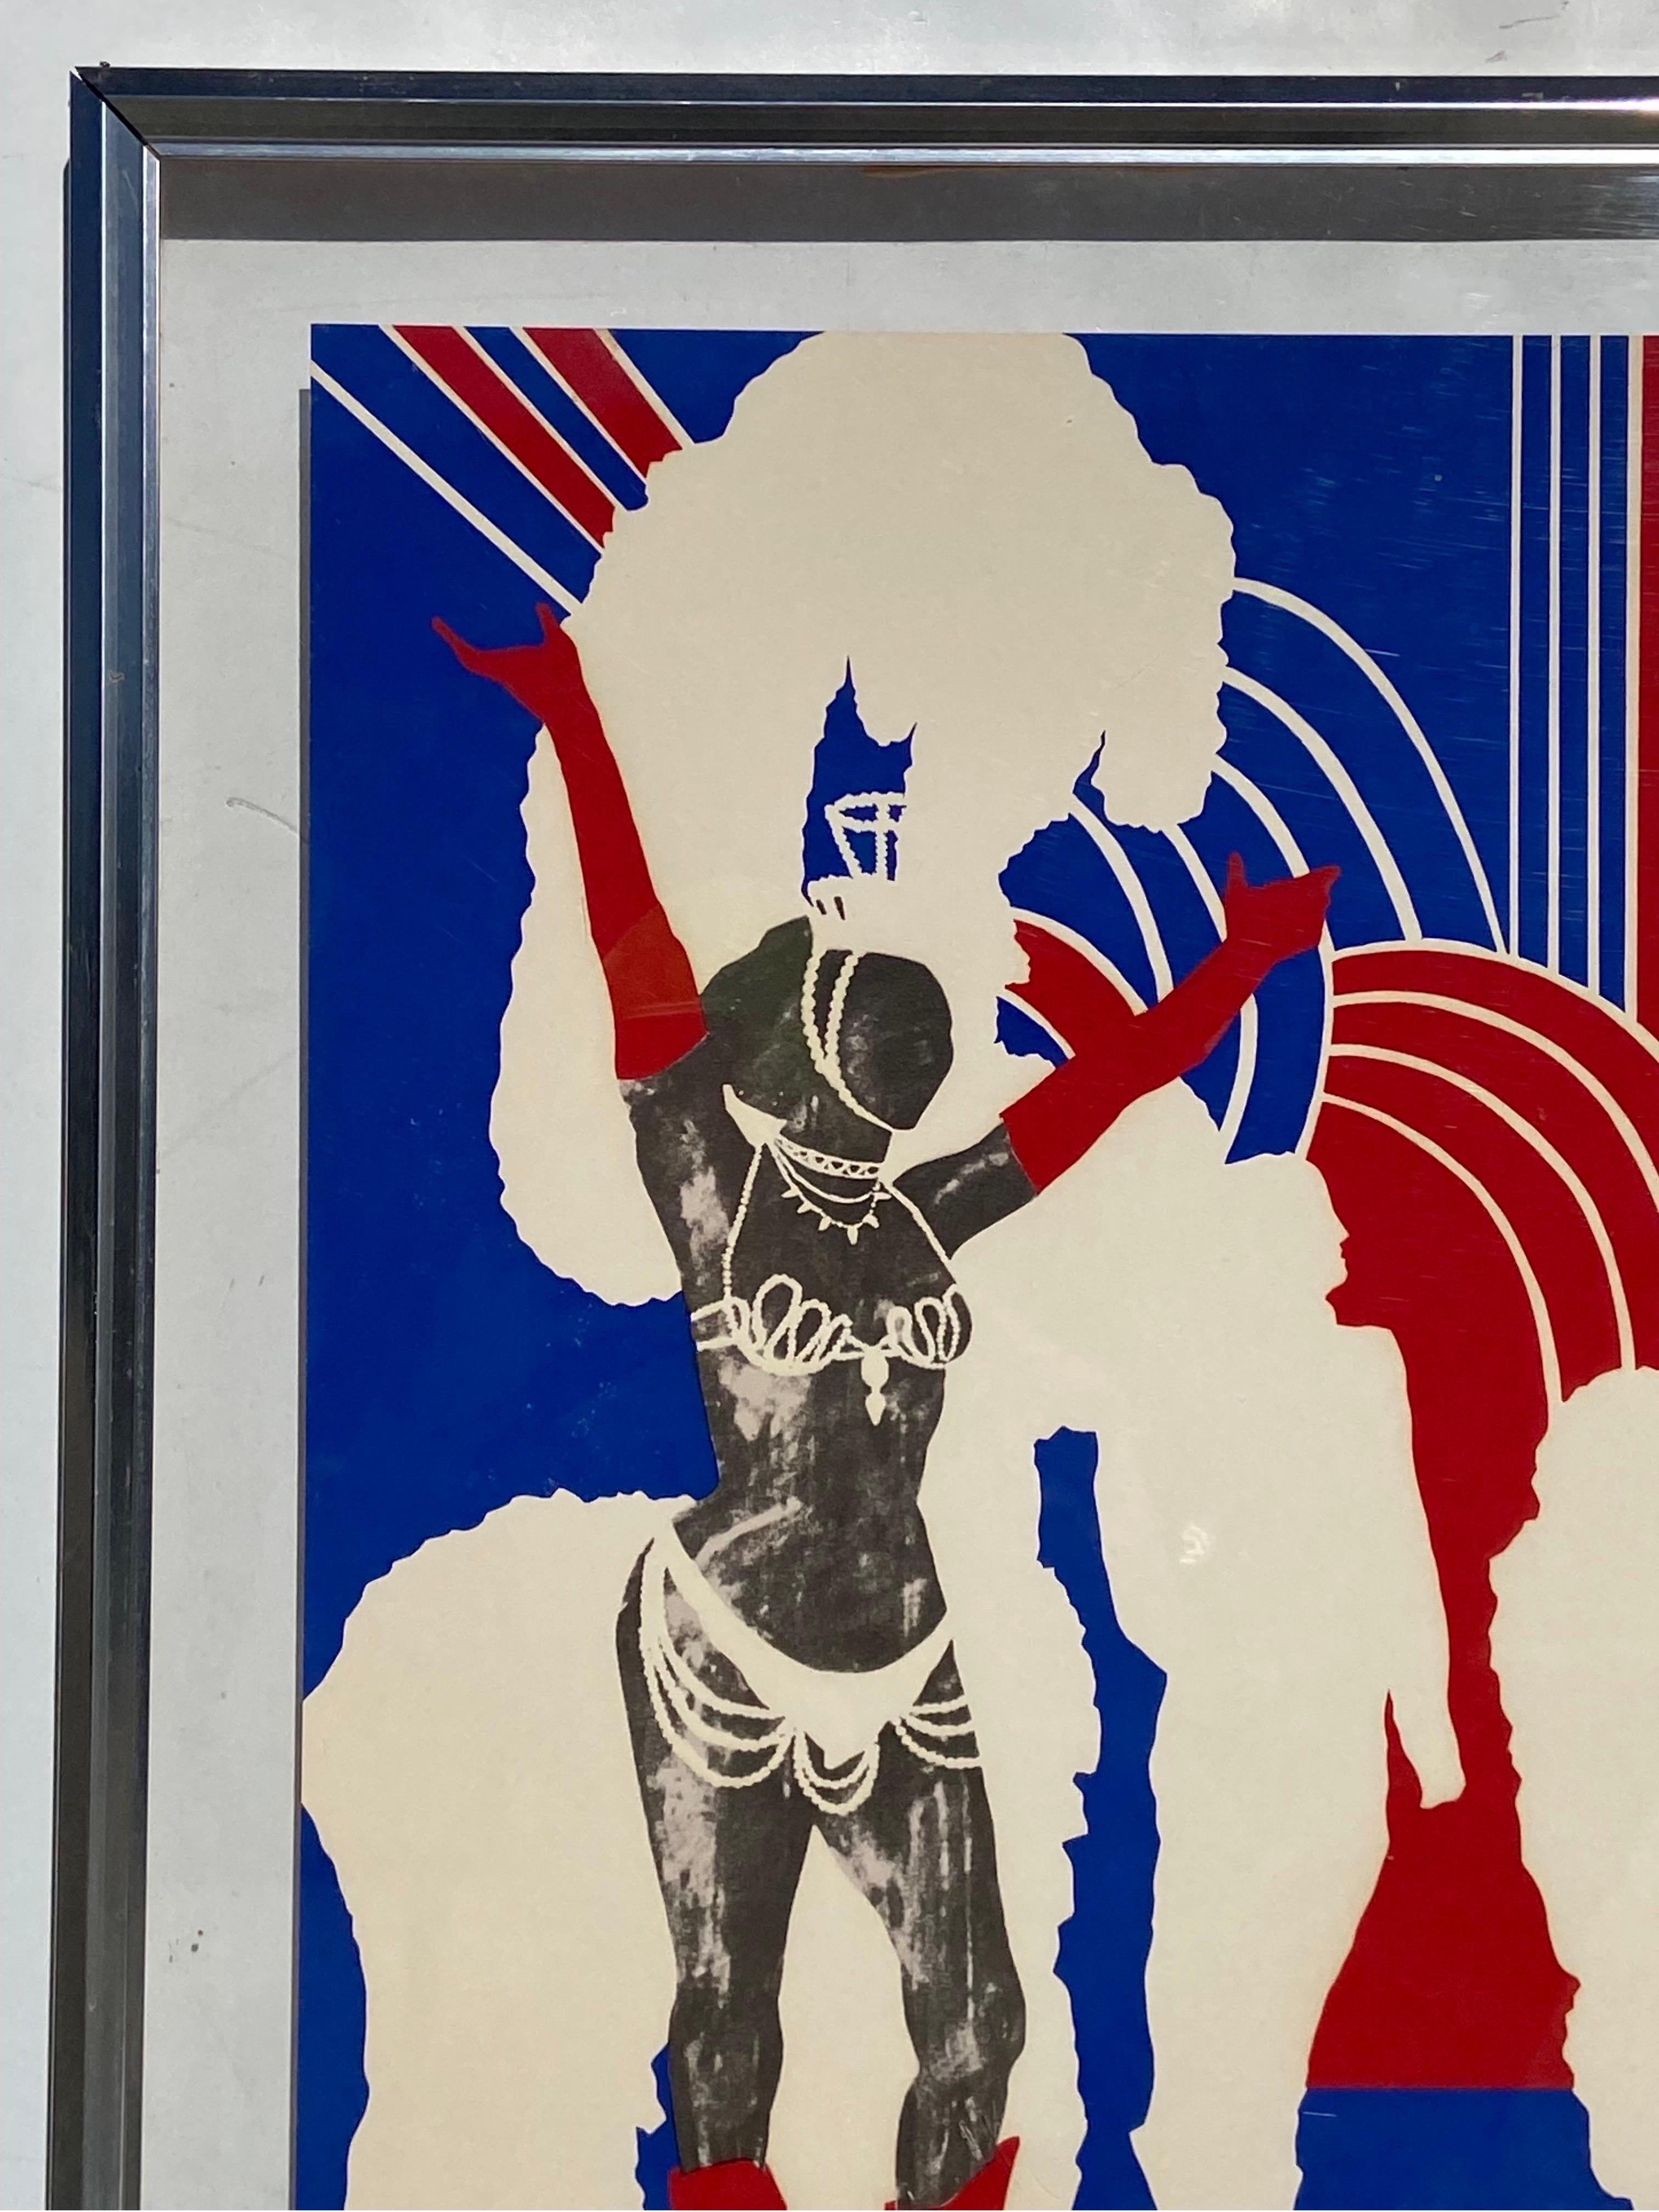 A vintage, 1975, artist's proof print by New York City artist Bea Kreloff (1926 - 2016). This work depicts a samba dancer set against a graphic background of red, white and blue. An edition of this work is in the Leslie Lohman Museum in New York